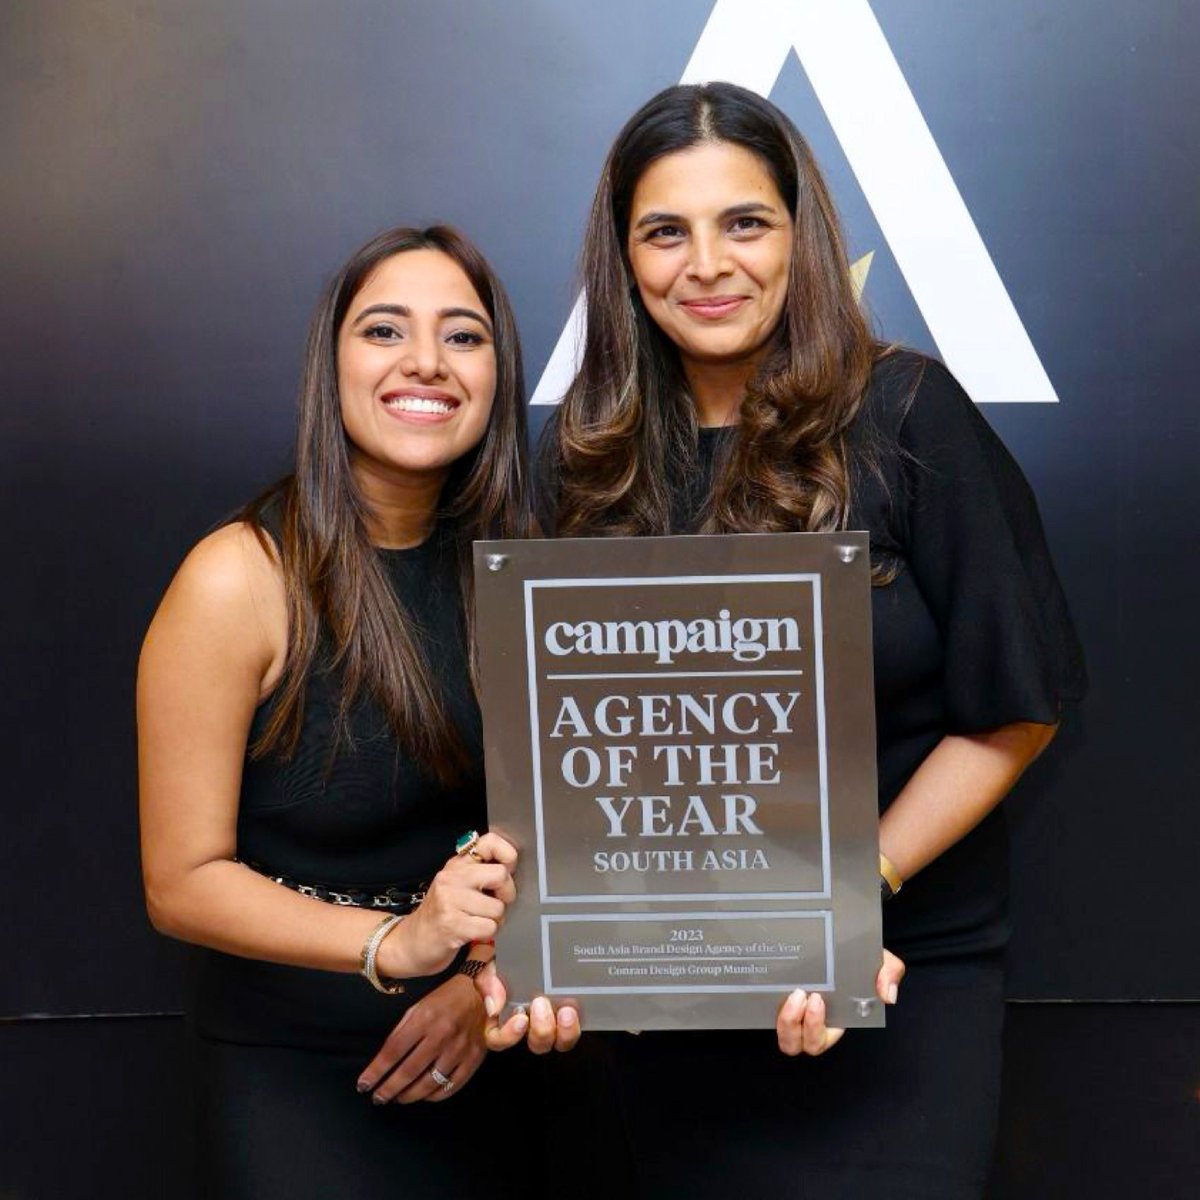 We have been awarded the Silver in the South Asia Brand Design Agency of the Year category at @Campaign_India #AgencyOfTheYear 2023 awards #conrandesigngroup #campaignmagazine #brandagencyoftheyear @Havas @ConranDesign @geet_nazir @mayuri_ @HavasIND @havascreative @CampaignAsia